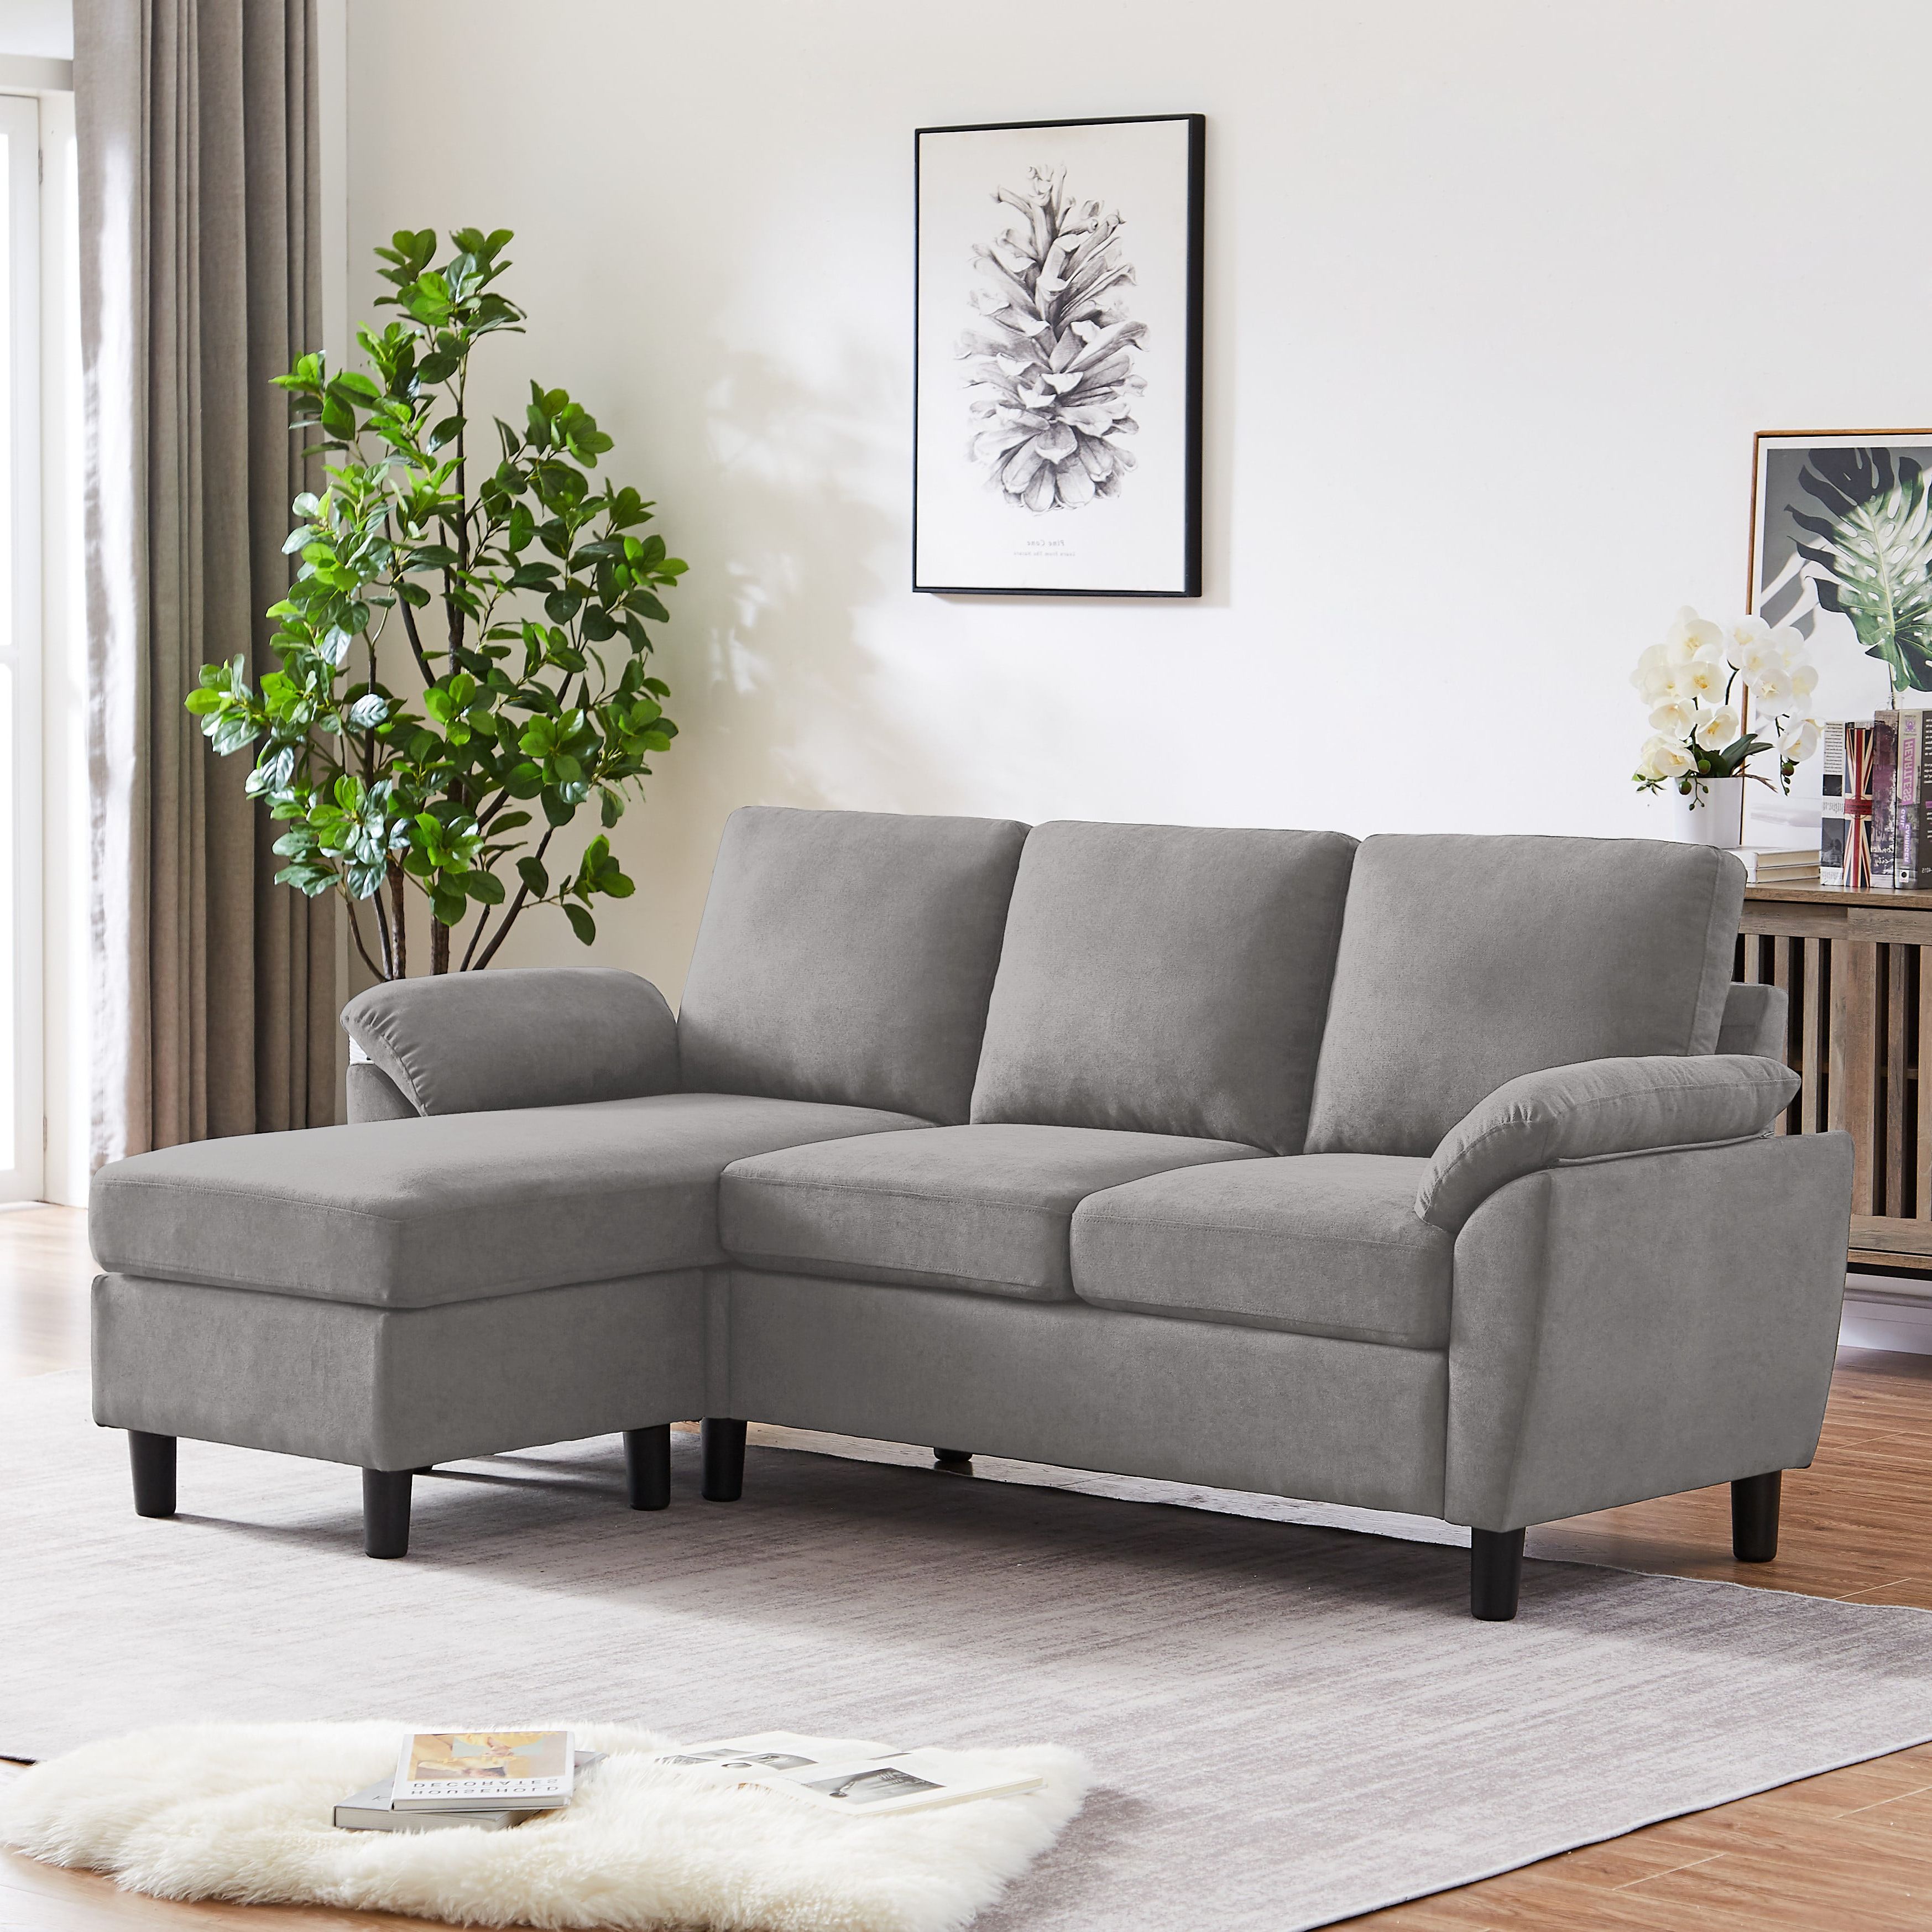 Jarenie Modern Fabric L Shapped Sofa Sectional Couches For Living Room Convertible  Sofa With Matching Chaise For Office, Apartment, Studio – Walmart With Regard To Convertible Sofas With Matching Chaise (View 3 of 20)